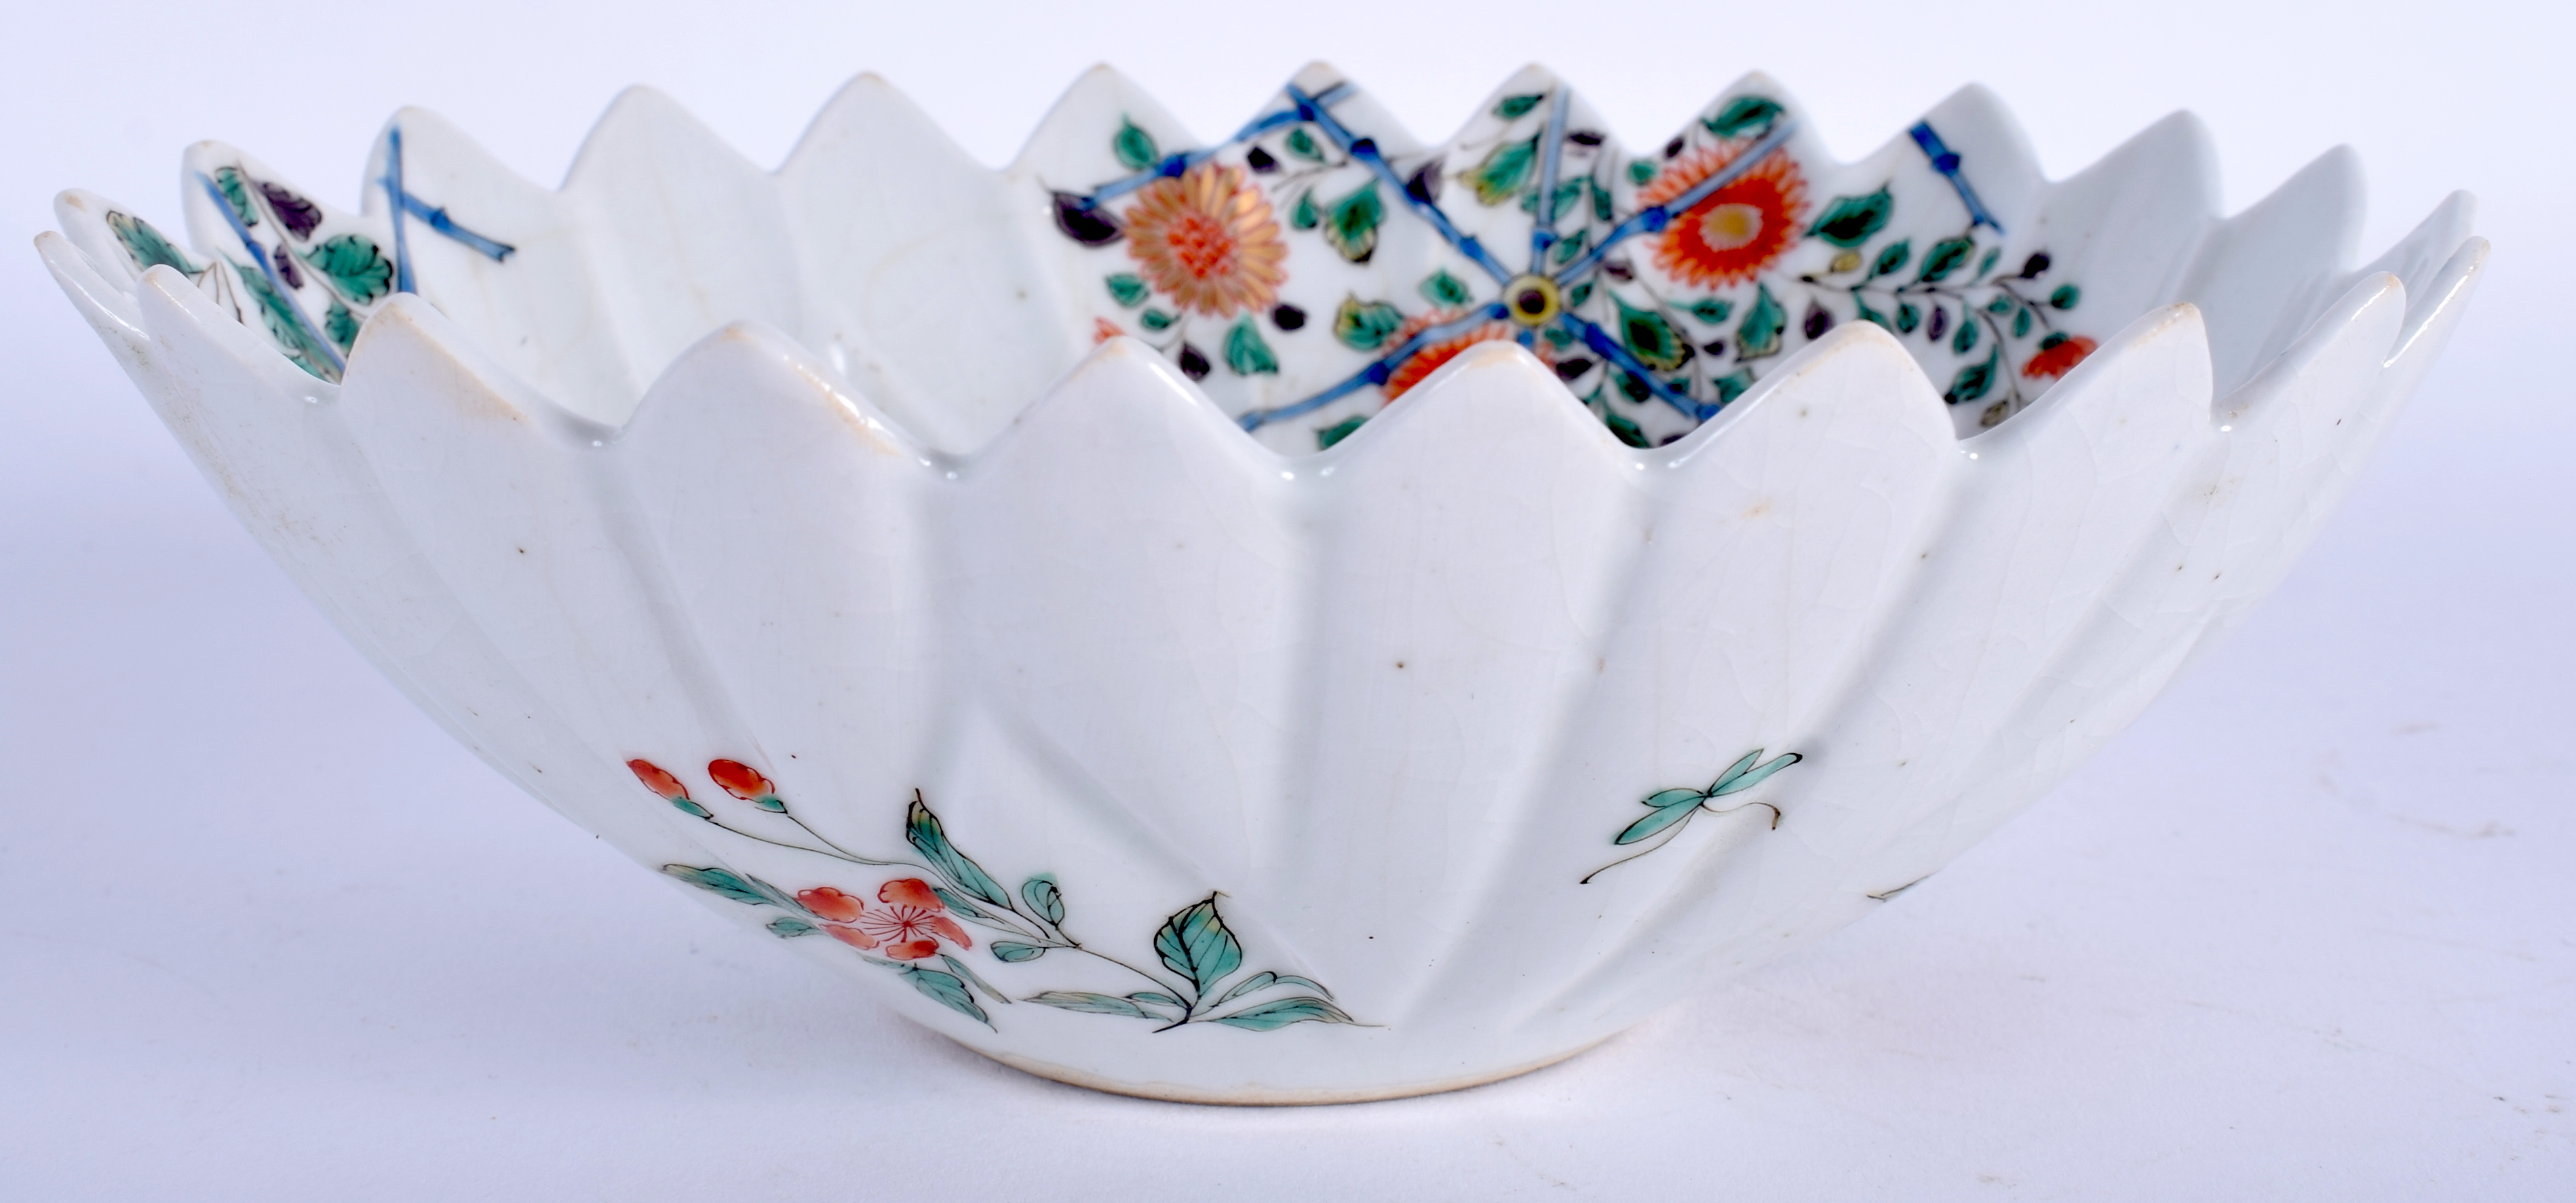 AN 18TH CENTURY JAPANESE EDO PERIOD KAKIEMON BOWL painted with foliage and birds. 16 cm x 12 cm. - Image 2 of 4